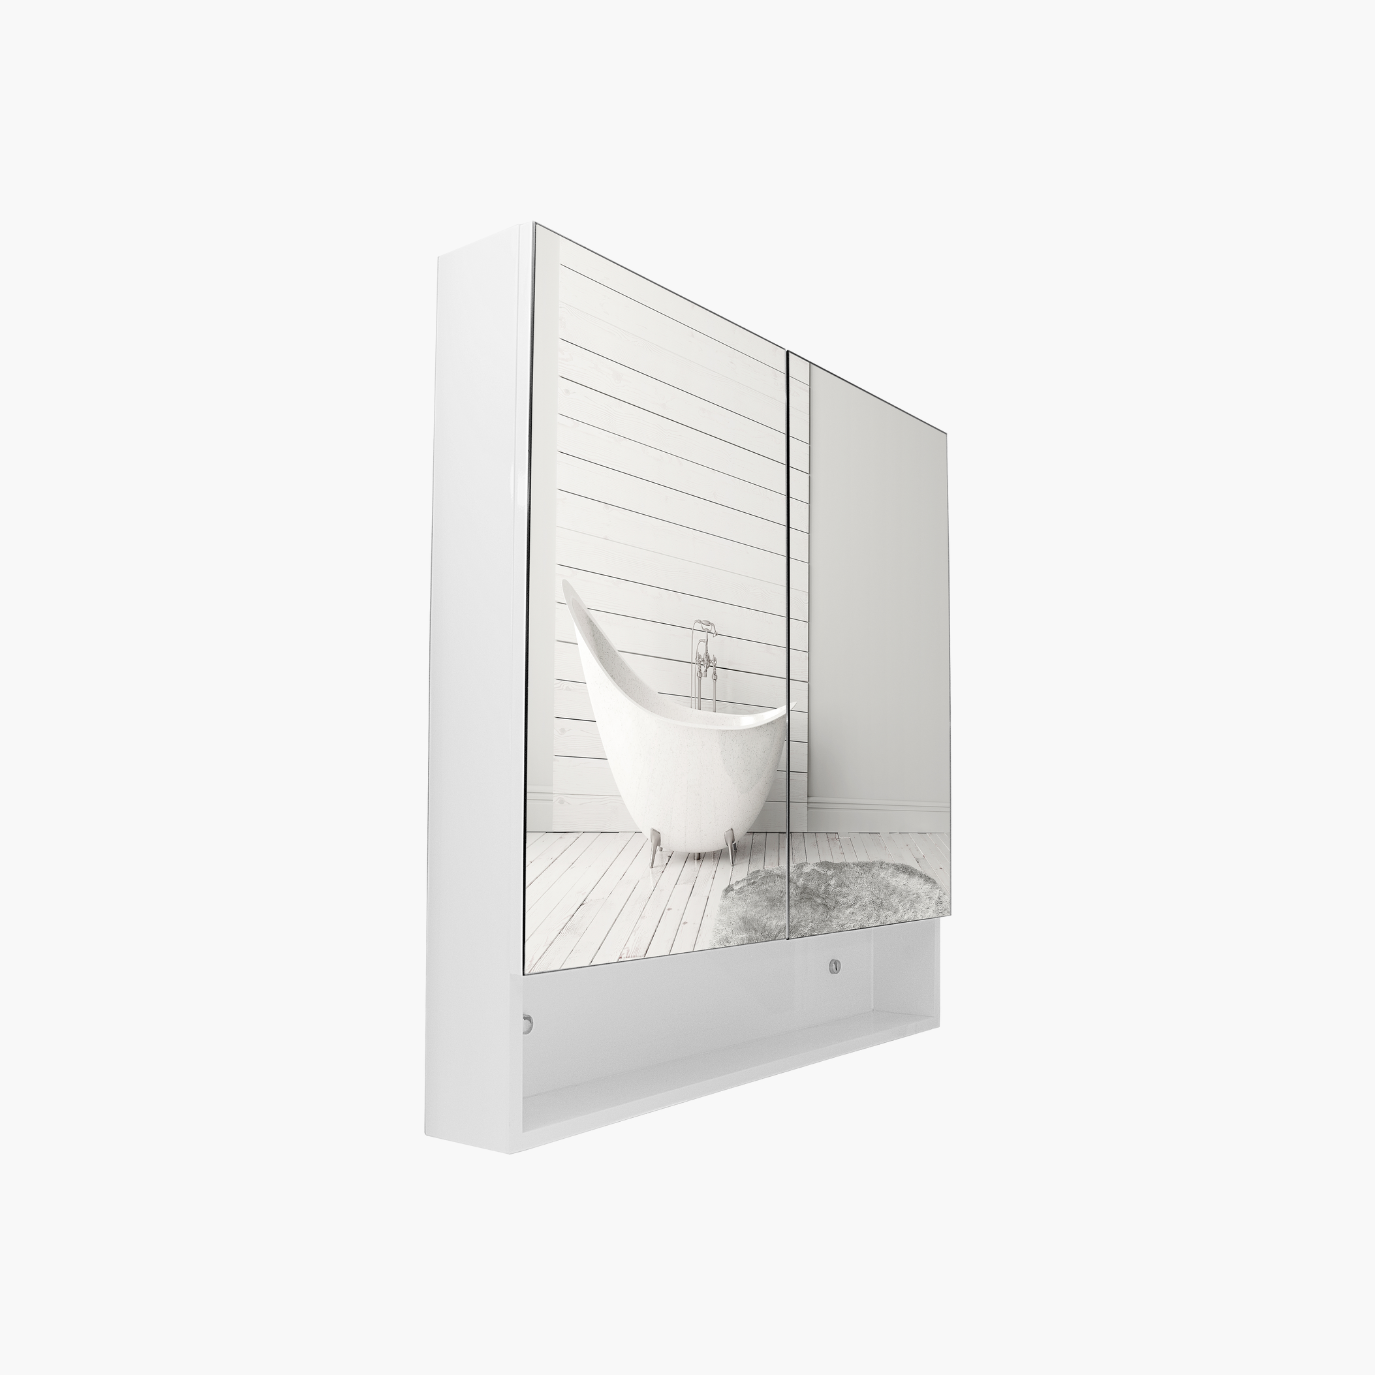 34'' Béarn white bathroom wall cabinet with 2 mirror doors